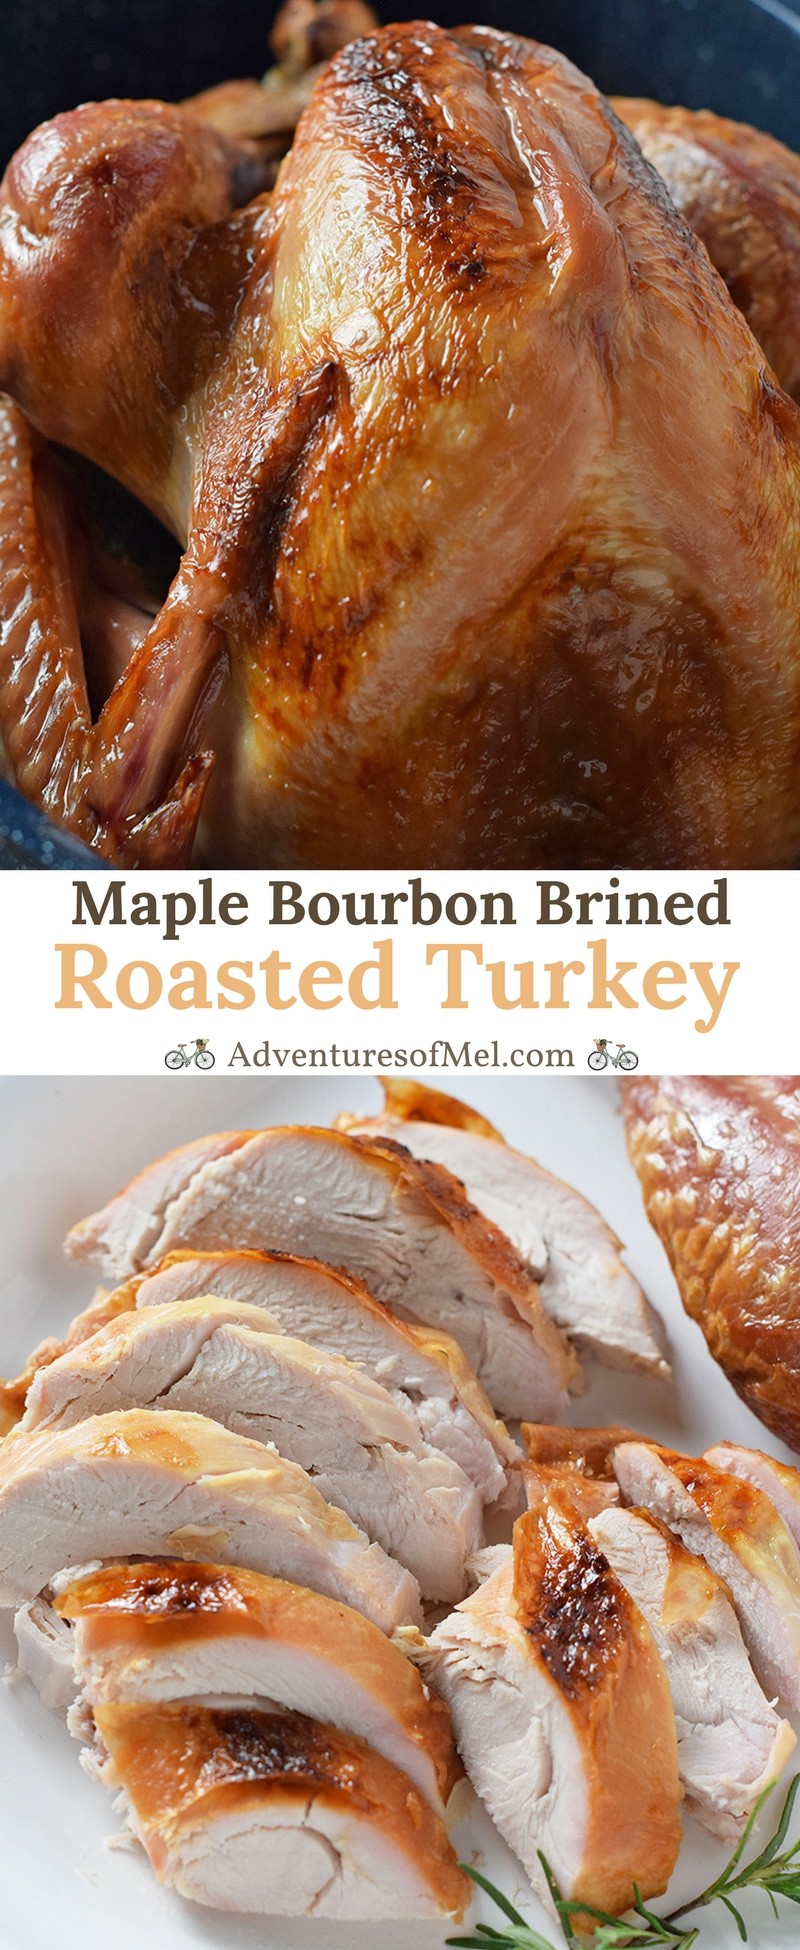 Maple Bourbon Brined Roasted Turkey recipe. How to make a perfectly cooked, moist, delicious turkey for dinner and holiday celebrations.